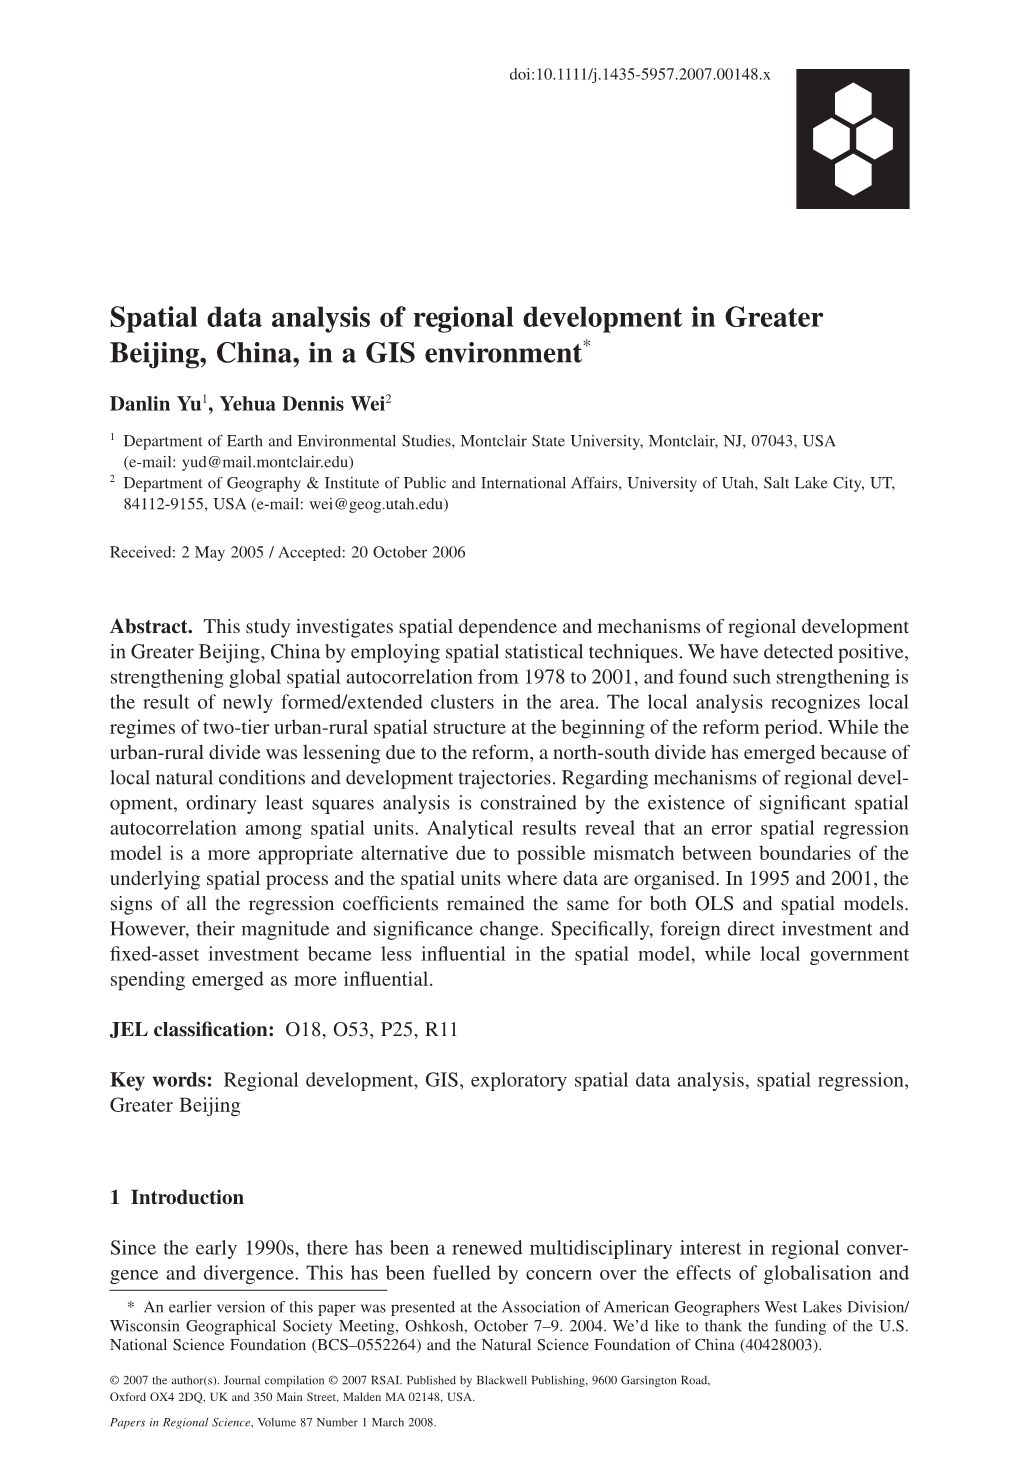 Spatial Data Analysis of Regional Development in Greater Beijing, China, in a GIS Environment*